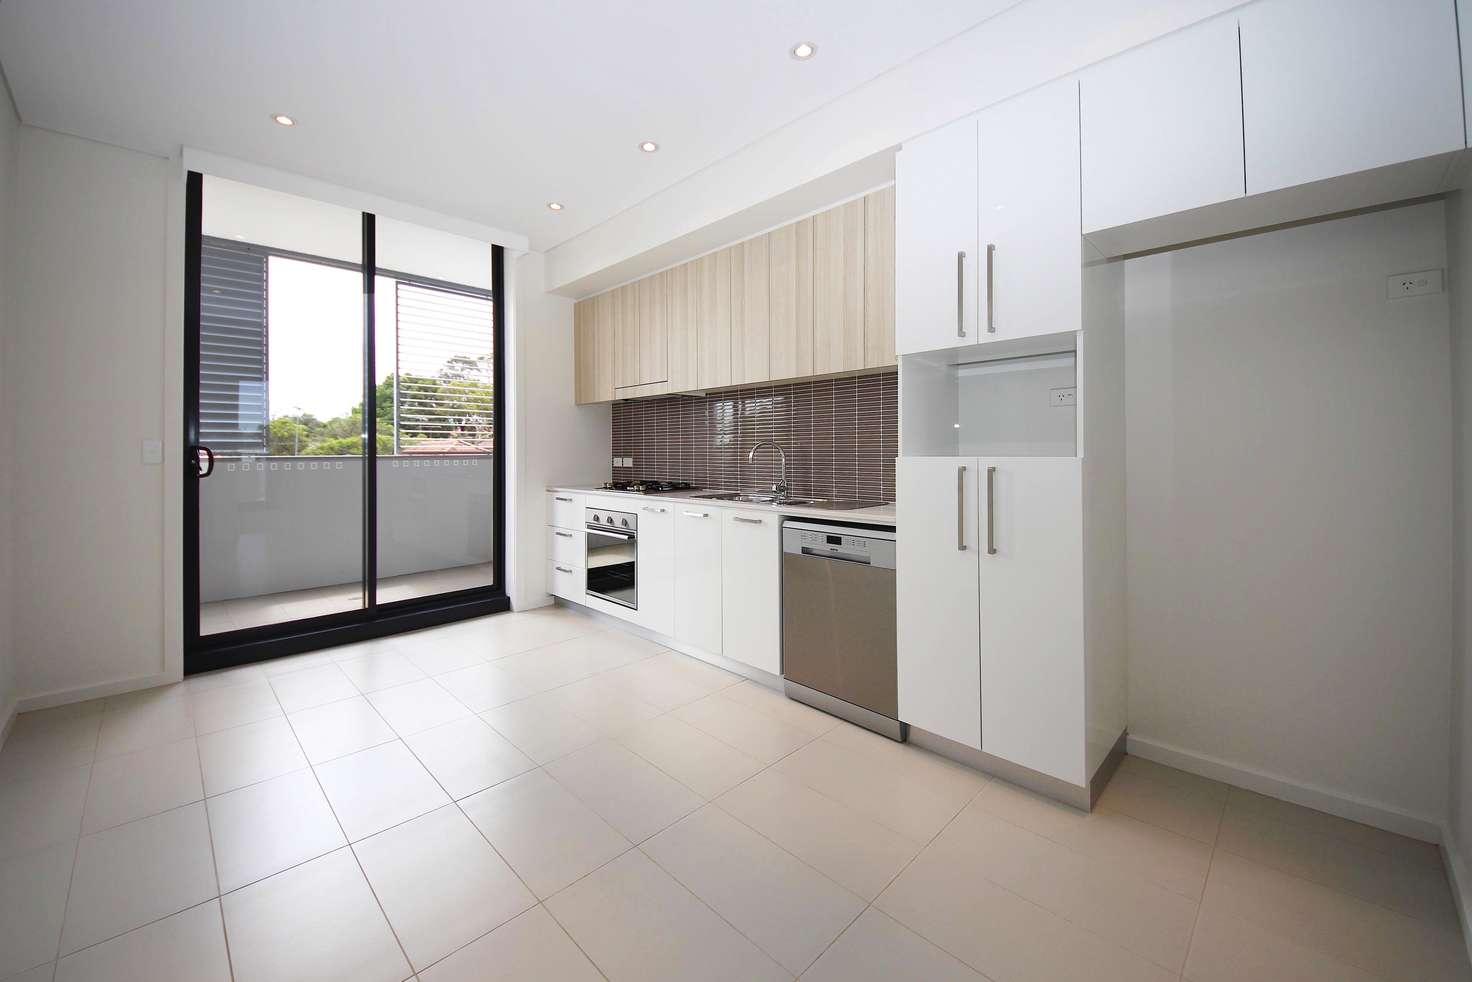 Main view of Homely apartment listing, 6/12 Victa Street, Clemton Park NSW 2206